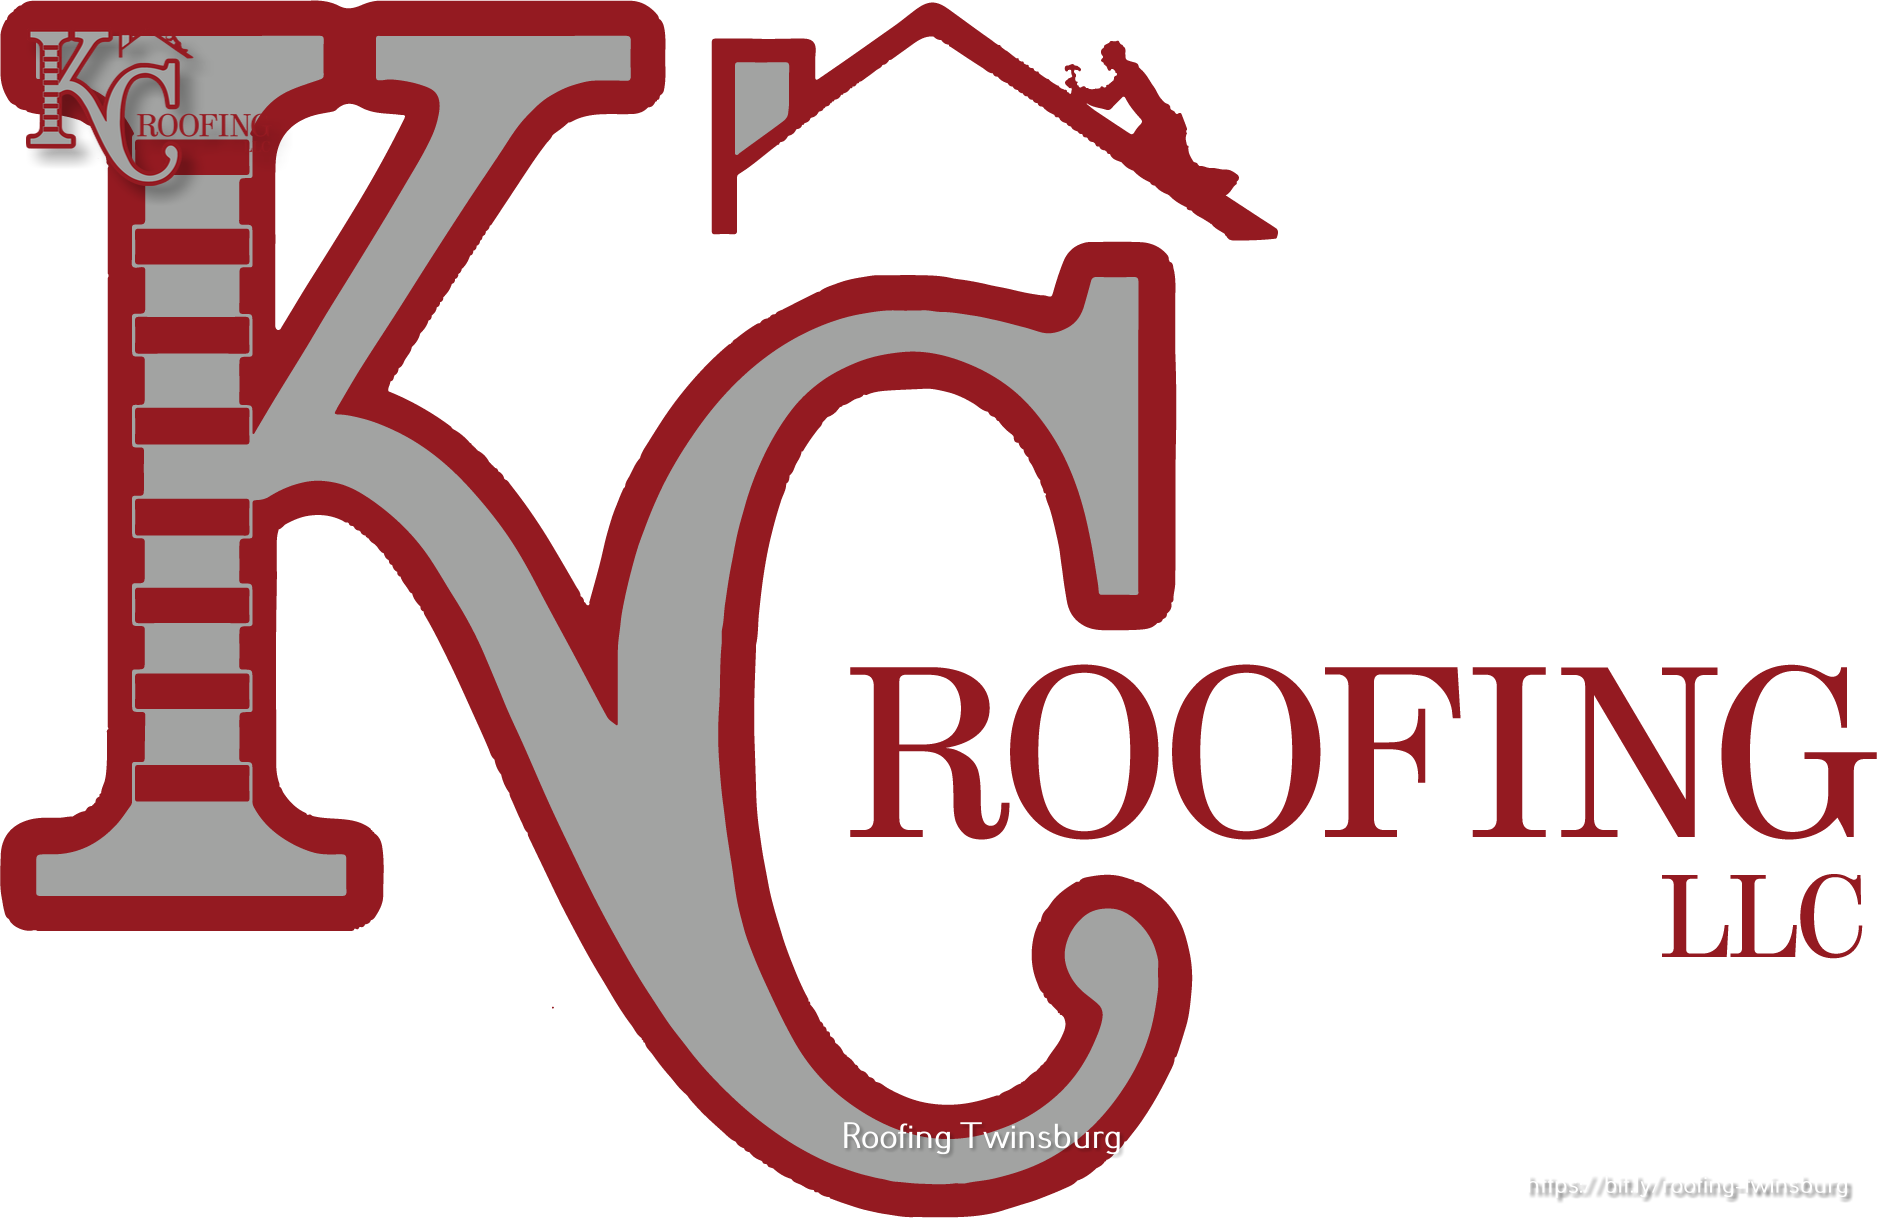 Kc Roofing, Llc Shares Tips For Choosing The Suitable Roofing Material 